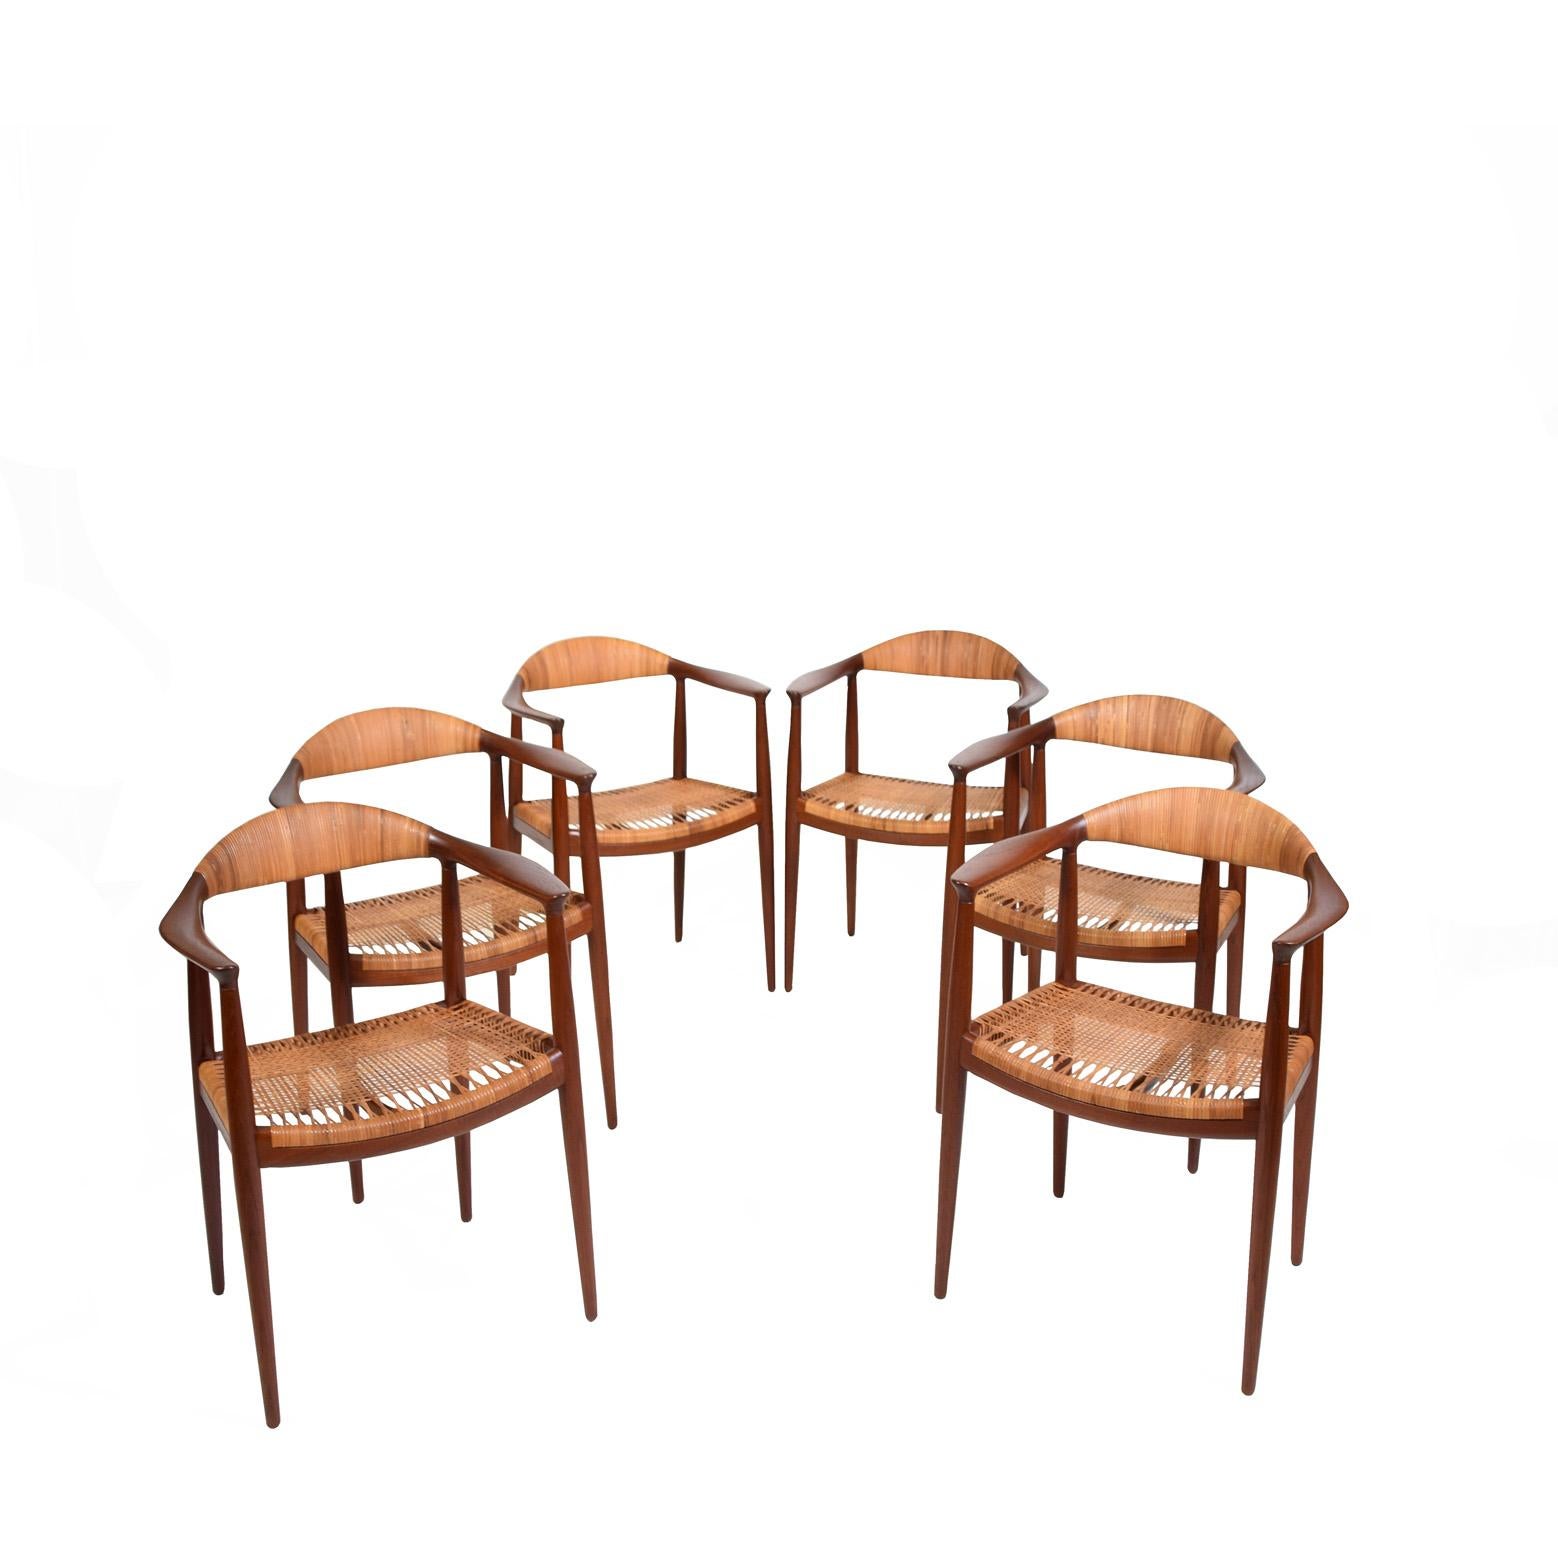 Original set table and chairs was purchased together in late 1950;’s Hans J. Wegner classic chairs solid teak JH501 table JH570 teak top oak base made by cabinetmaker Johannes Hansen.